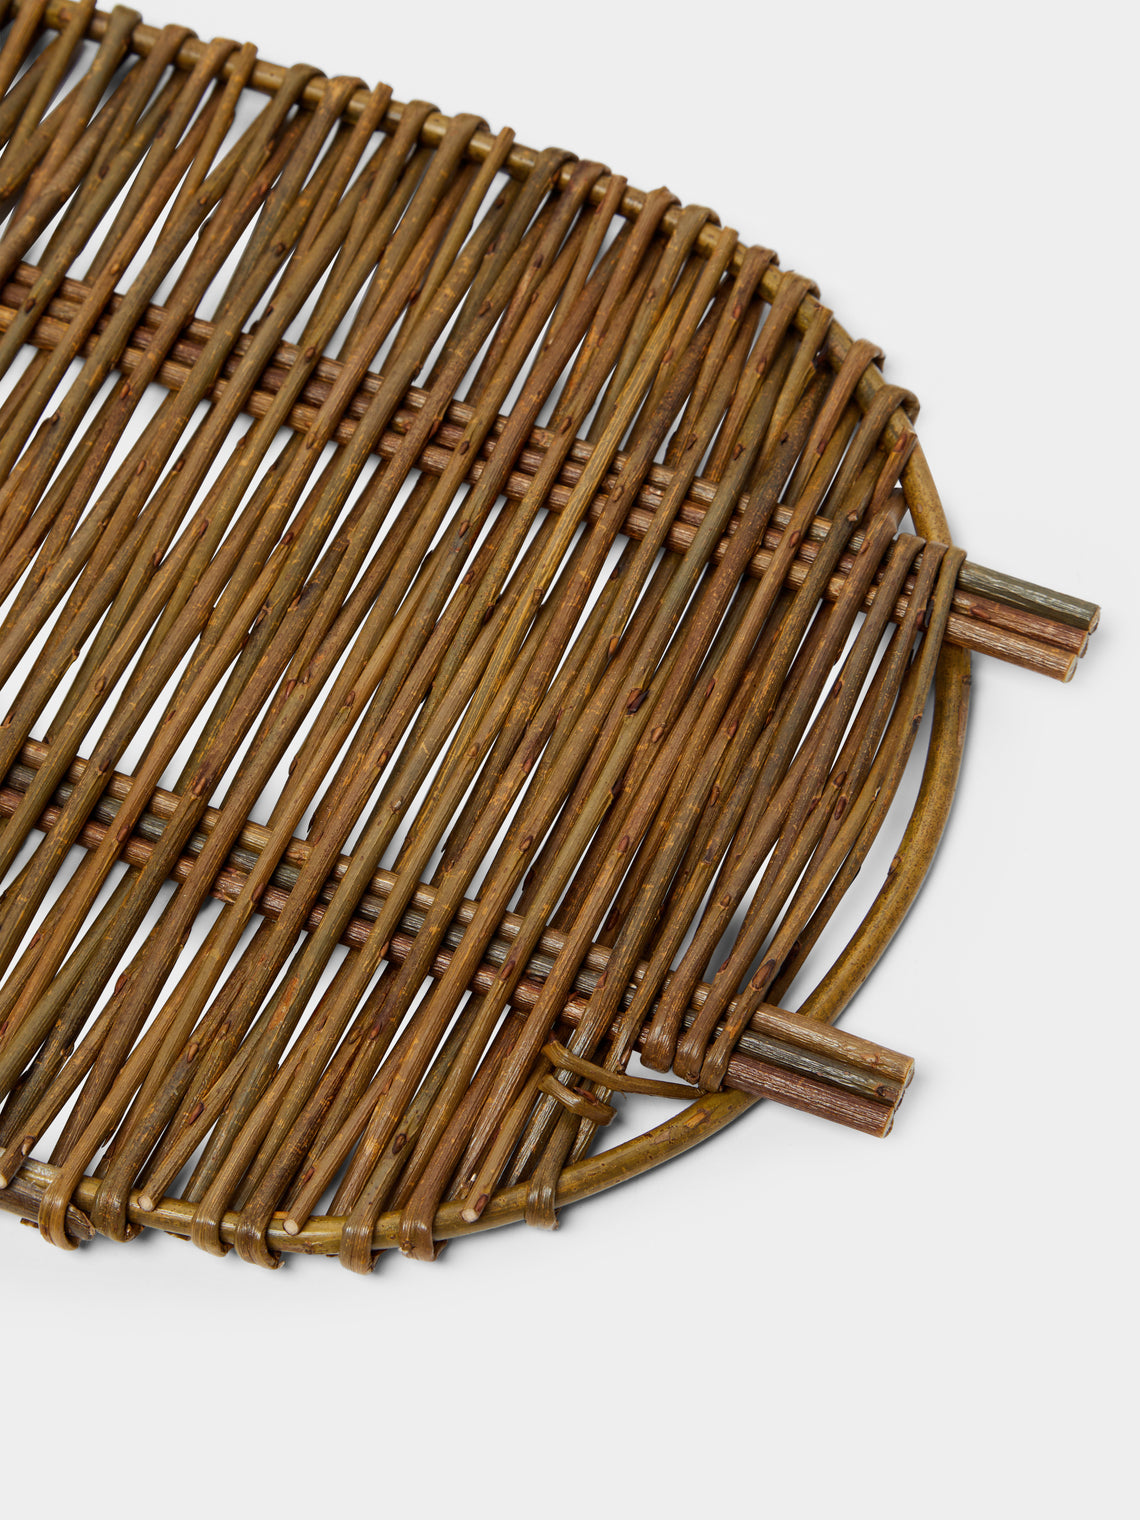 Hopewood Baskets - Handwoven Willow Tray -  - ABASK